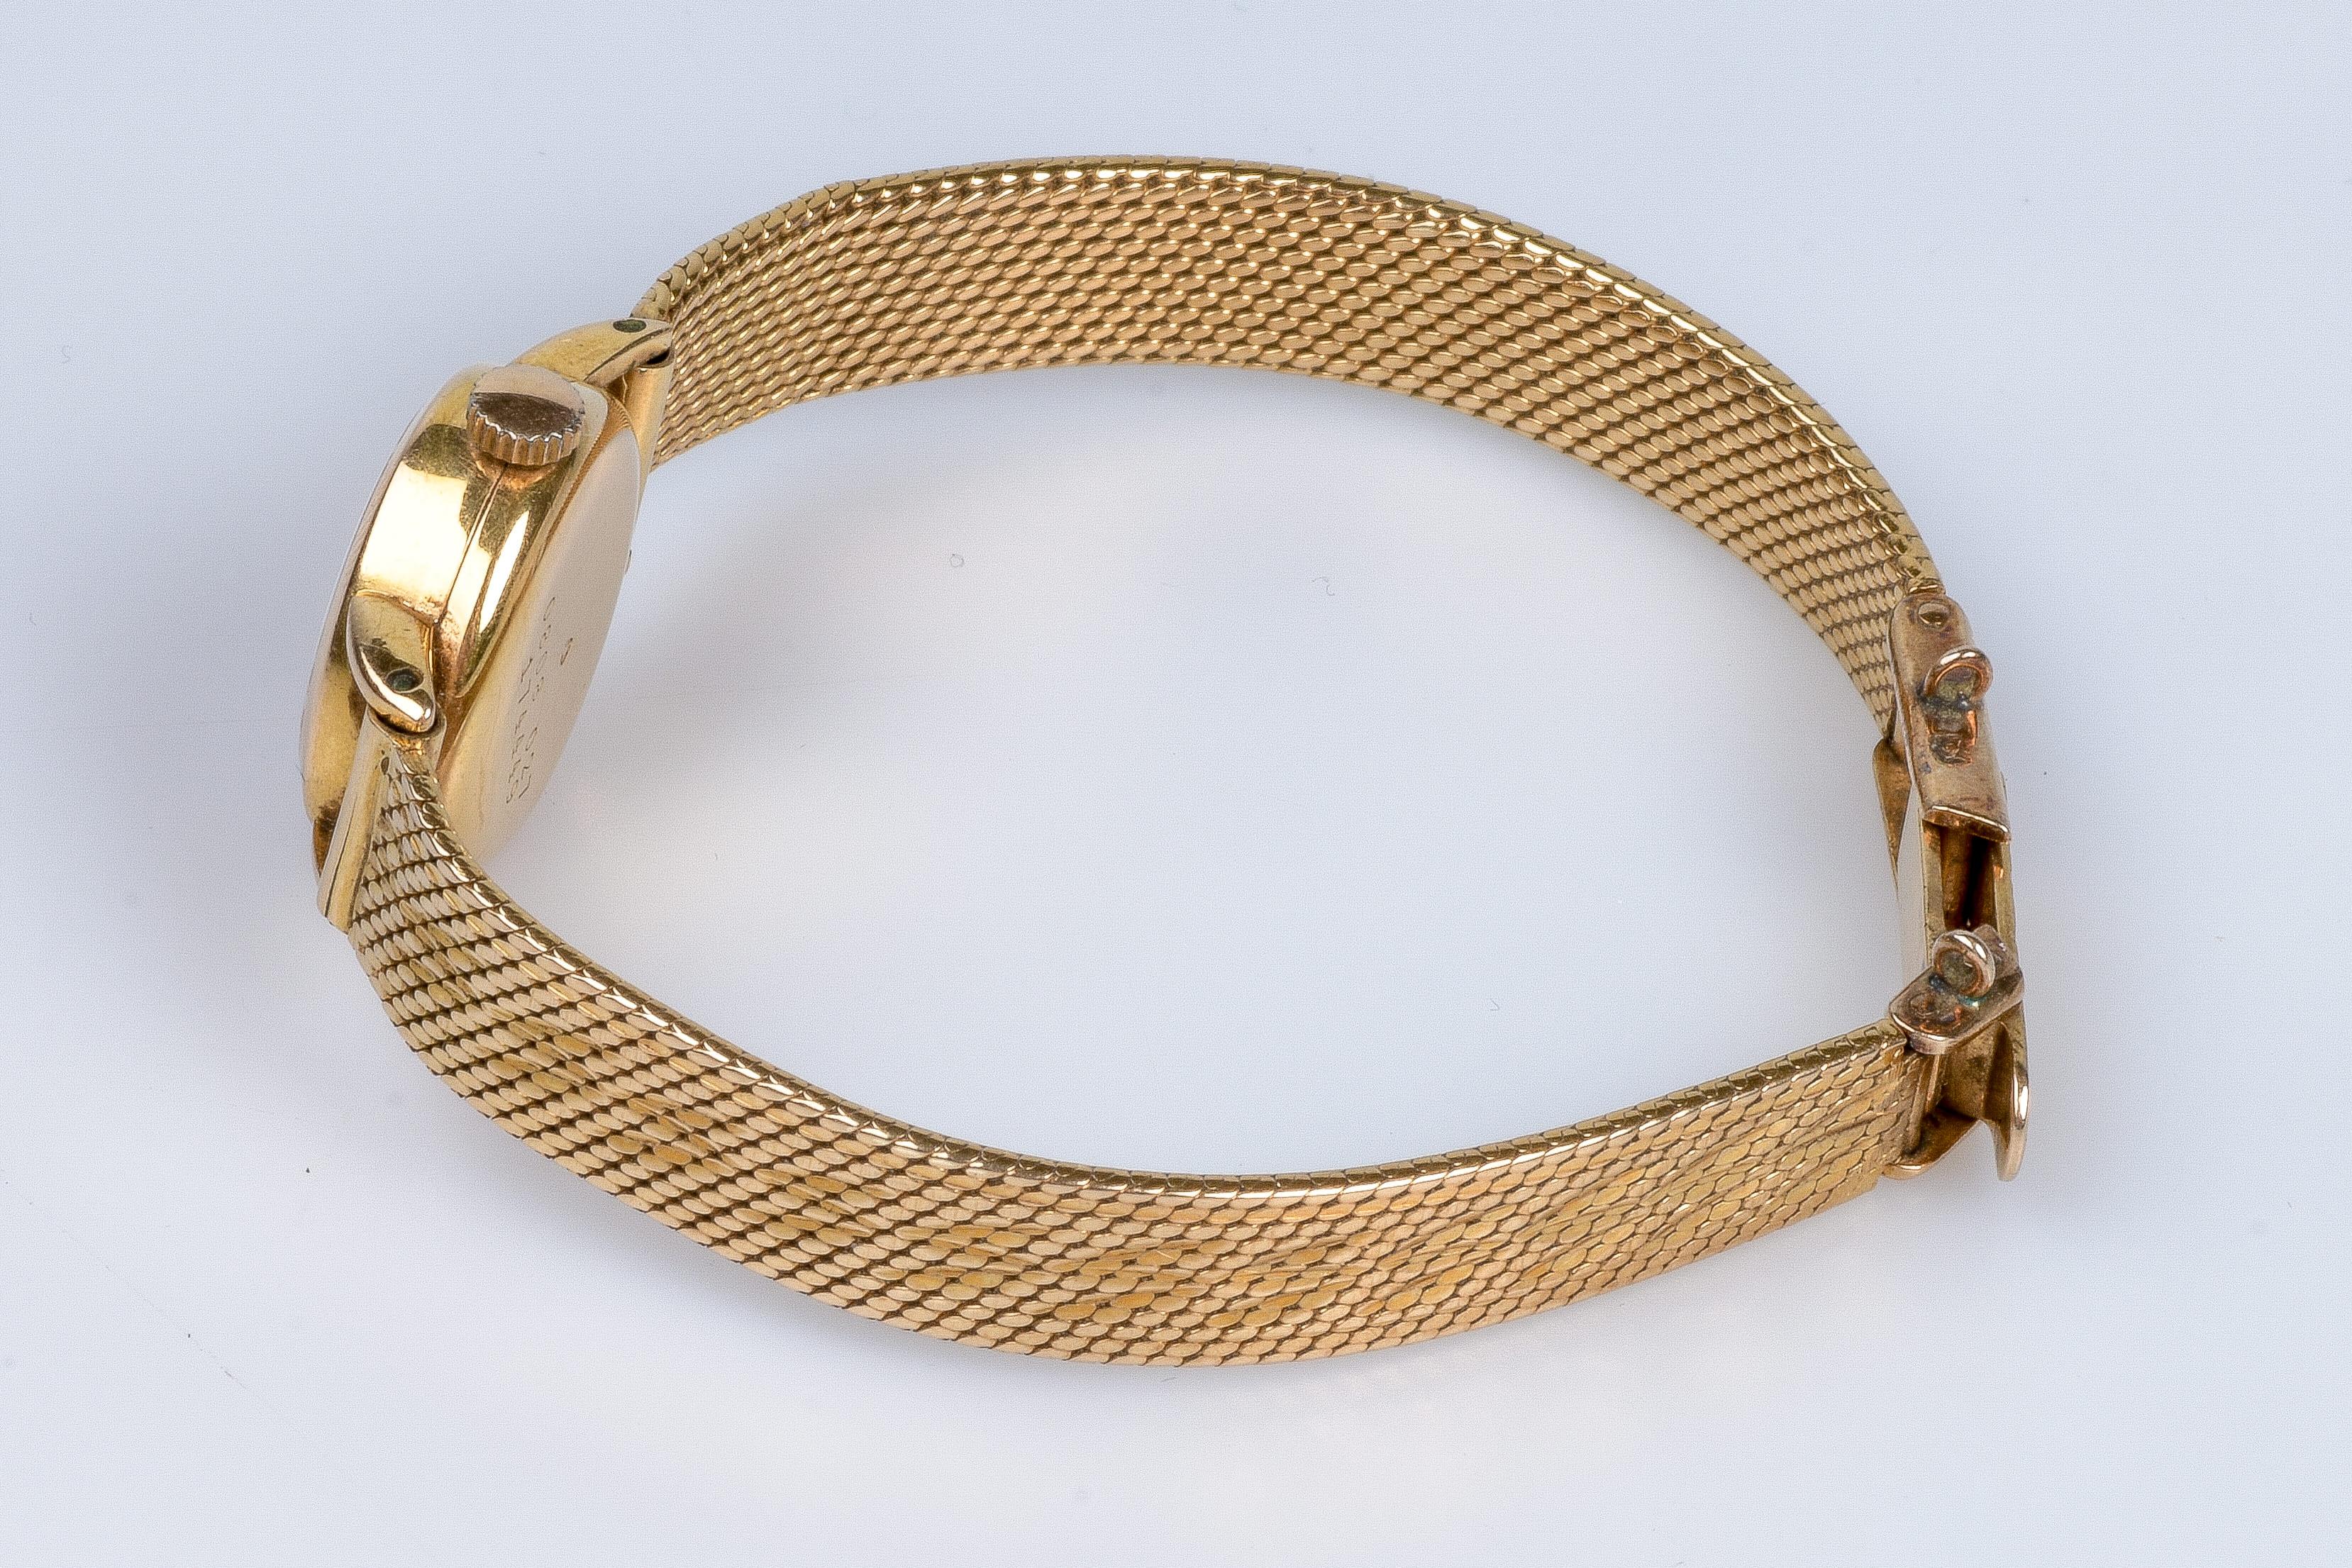 CERTINA's watch in 18carats yellow gold with a soft decorated fine mesh bracelet 8